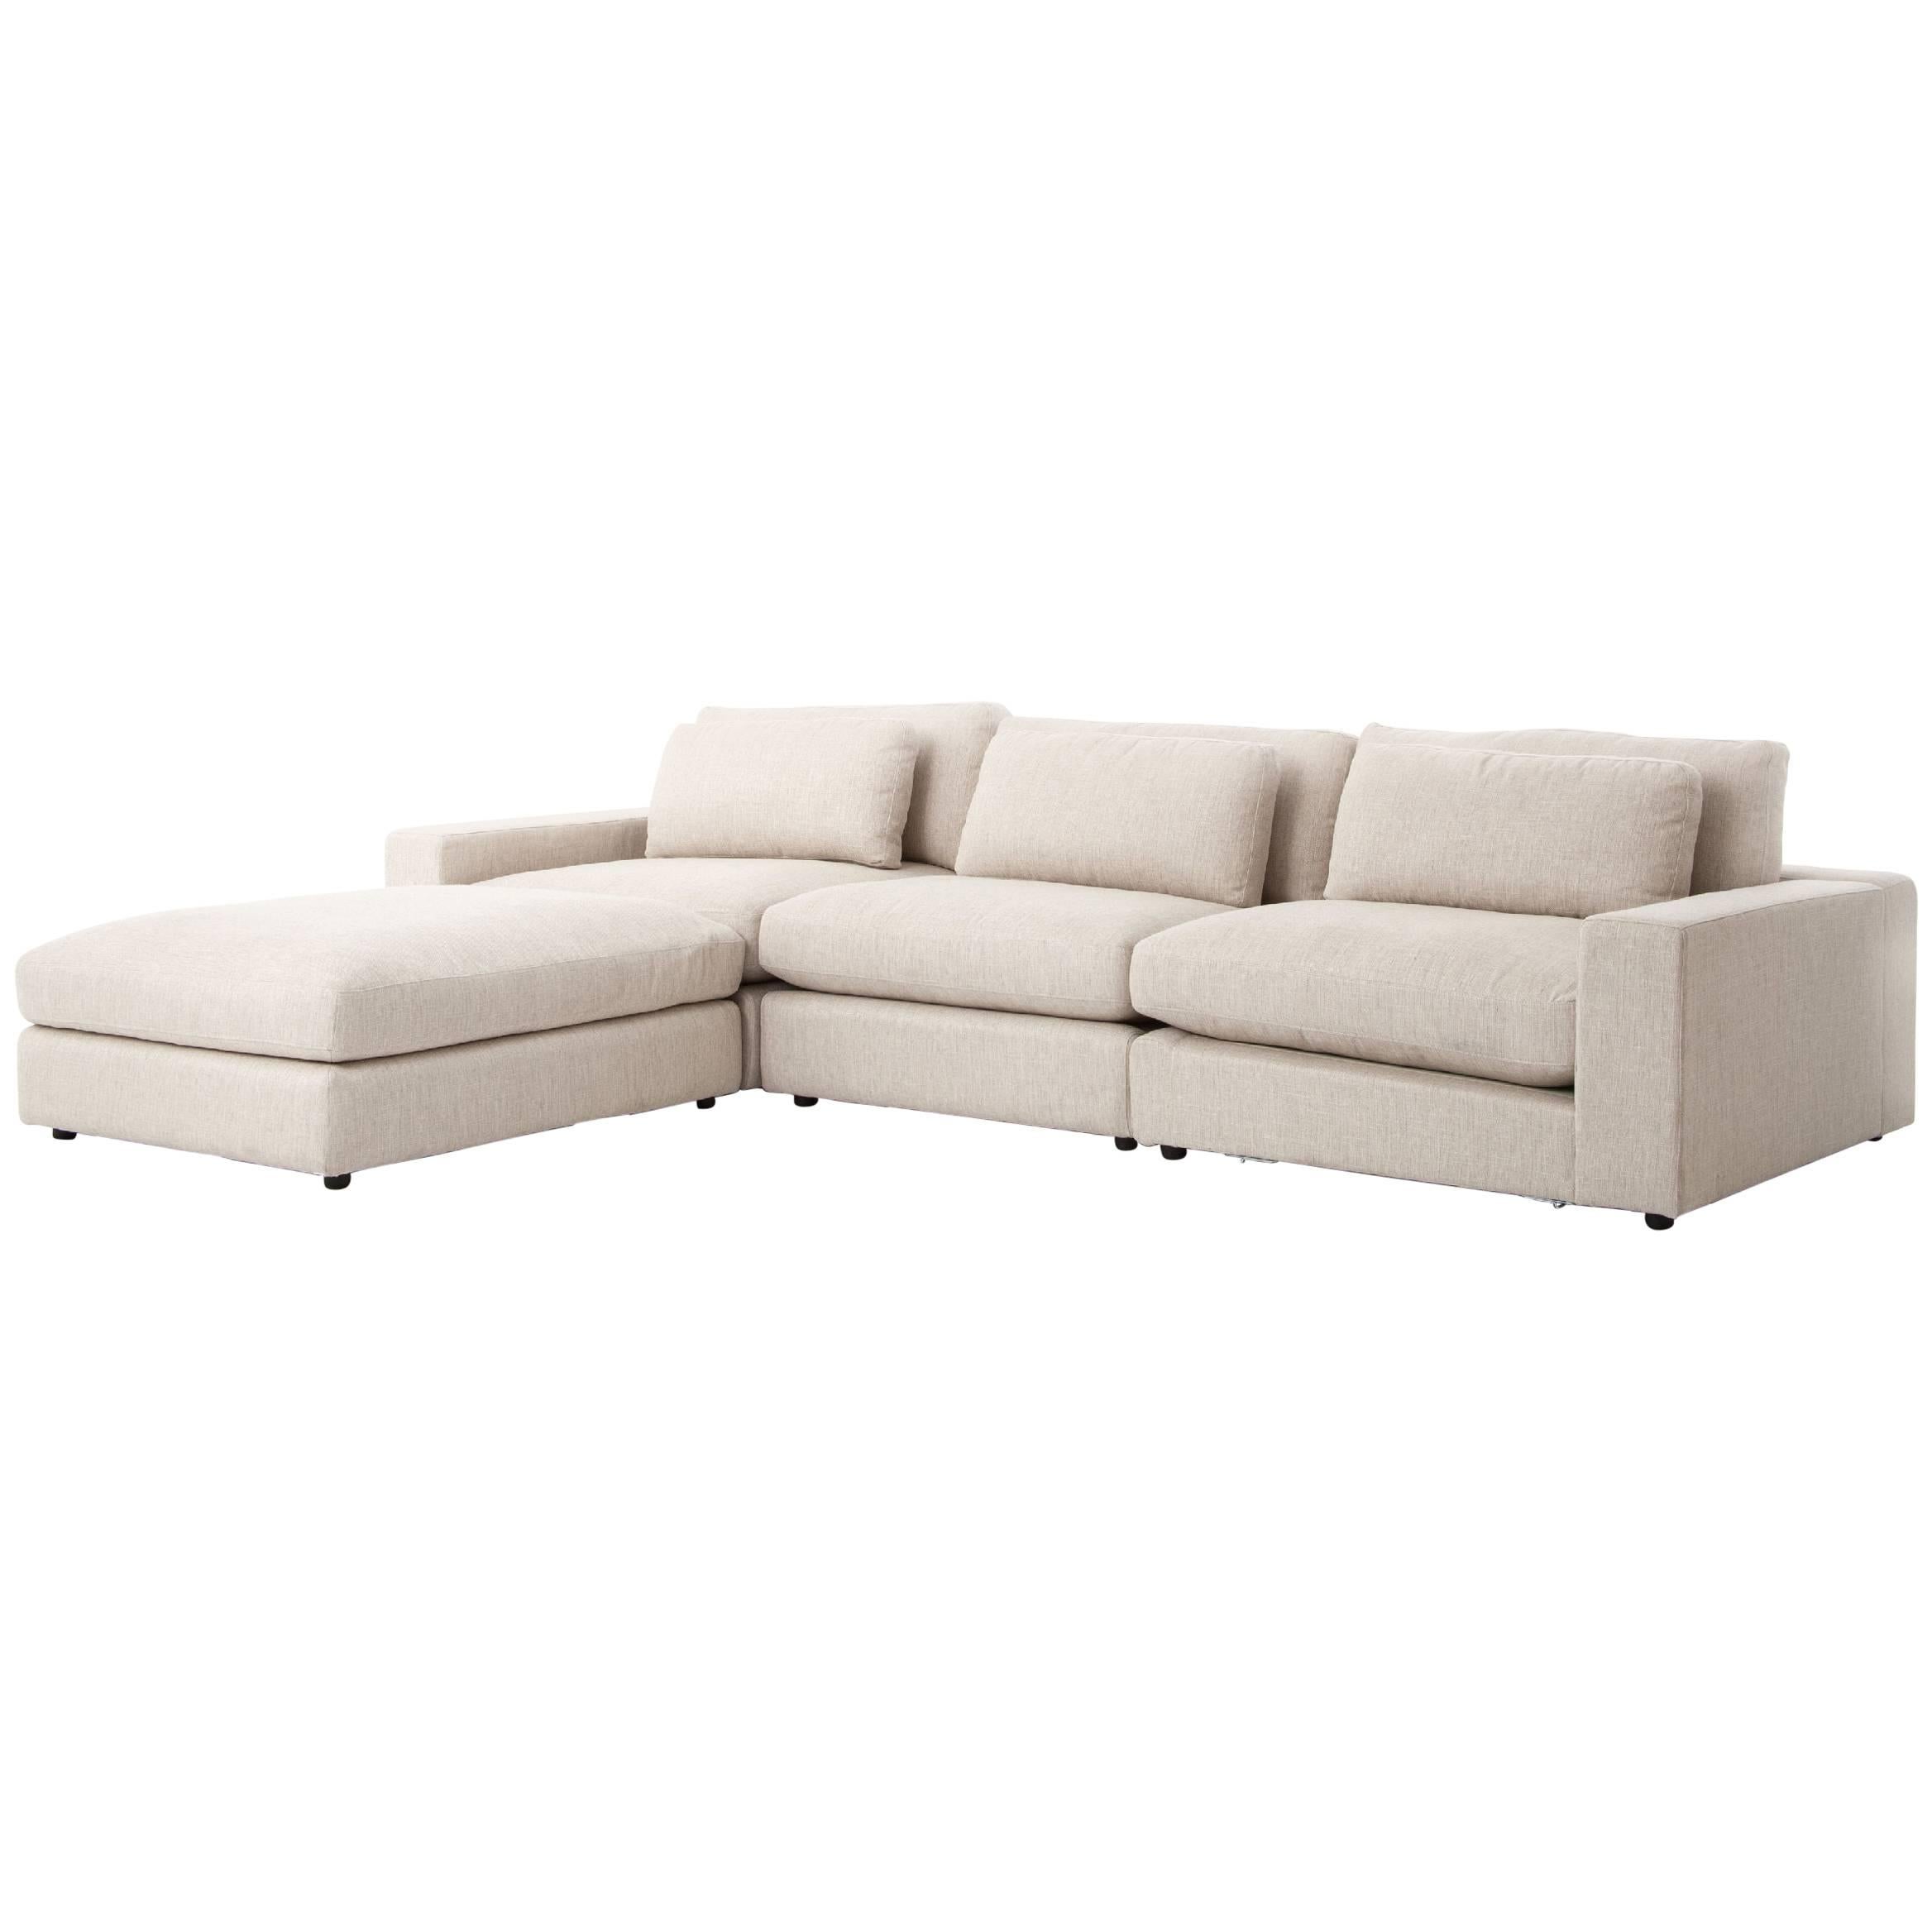 Sectional Sofa For Sale